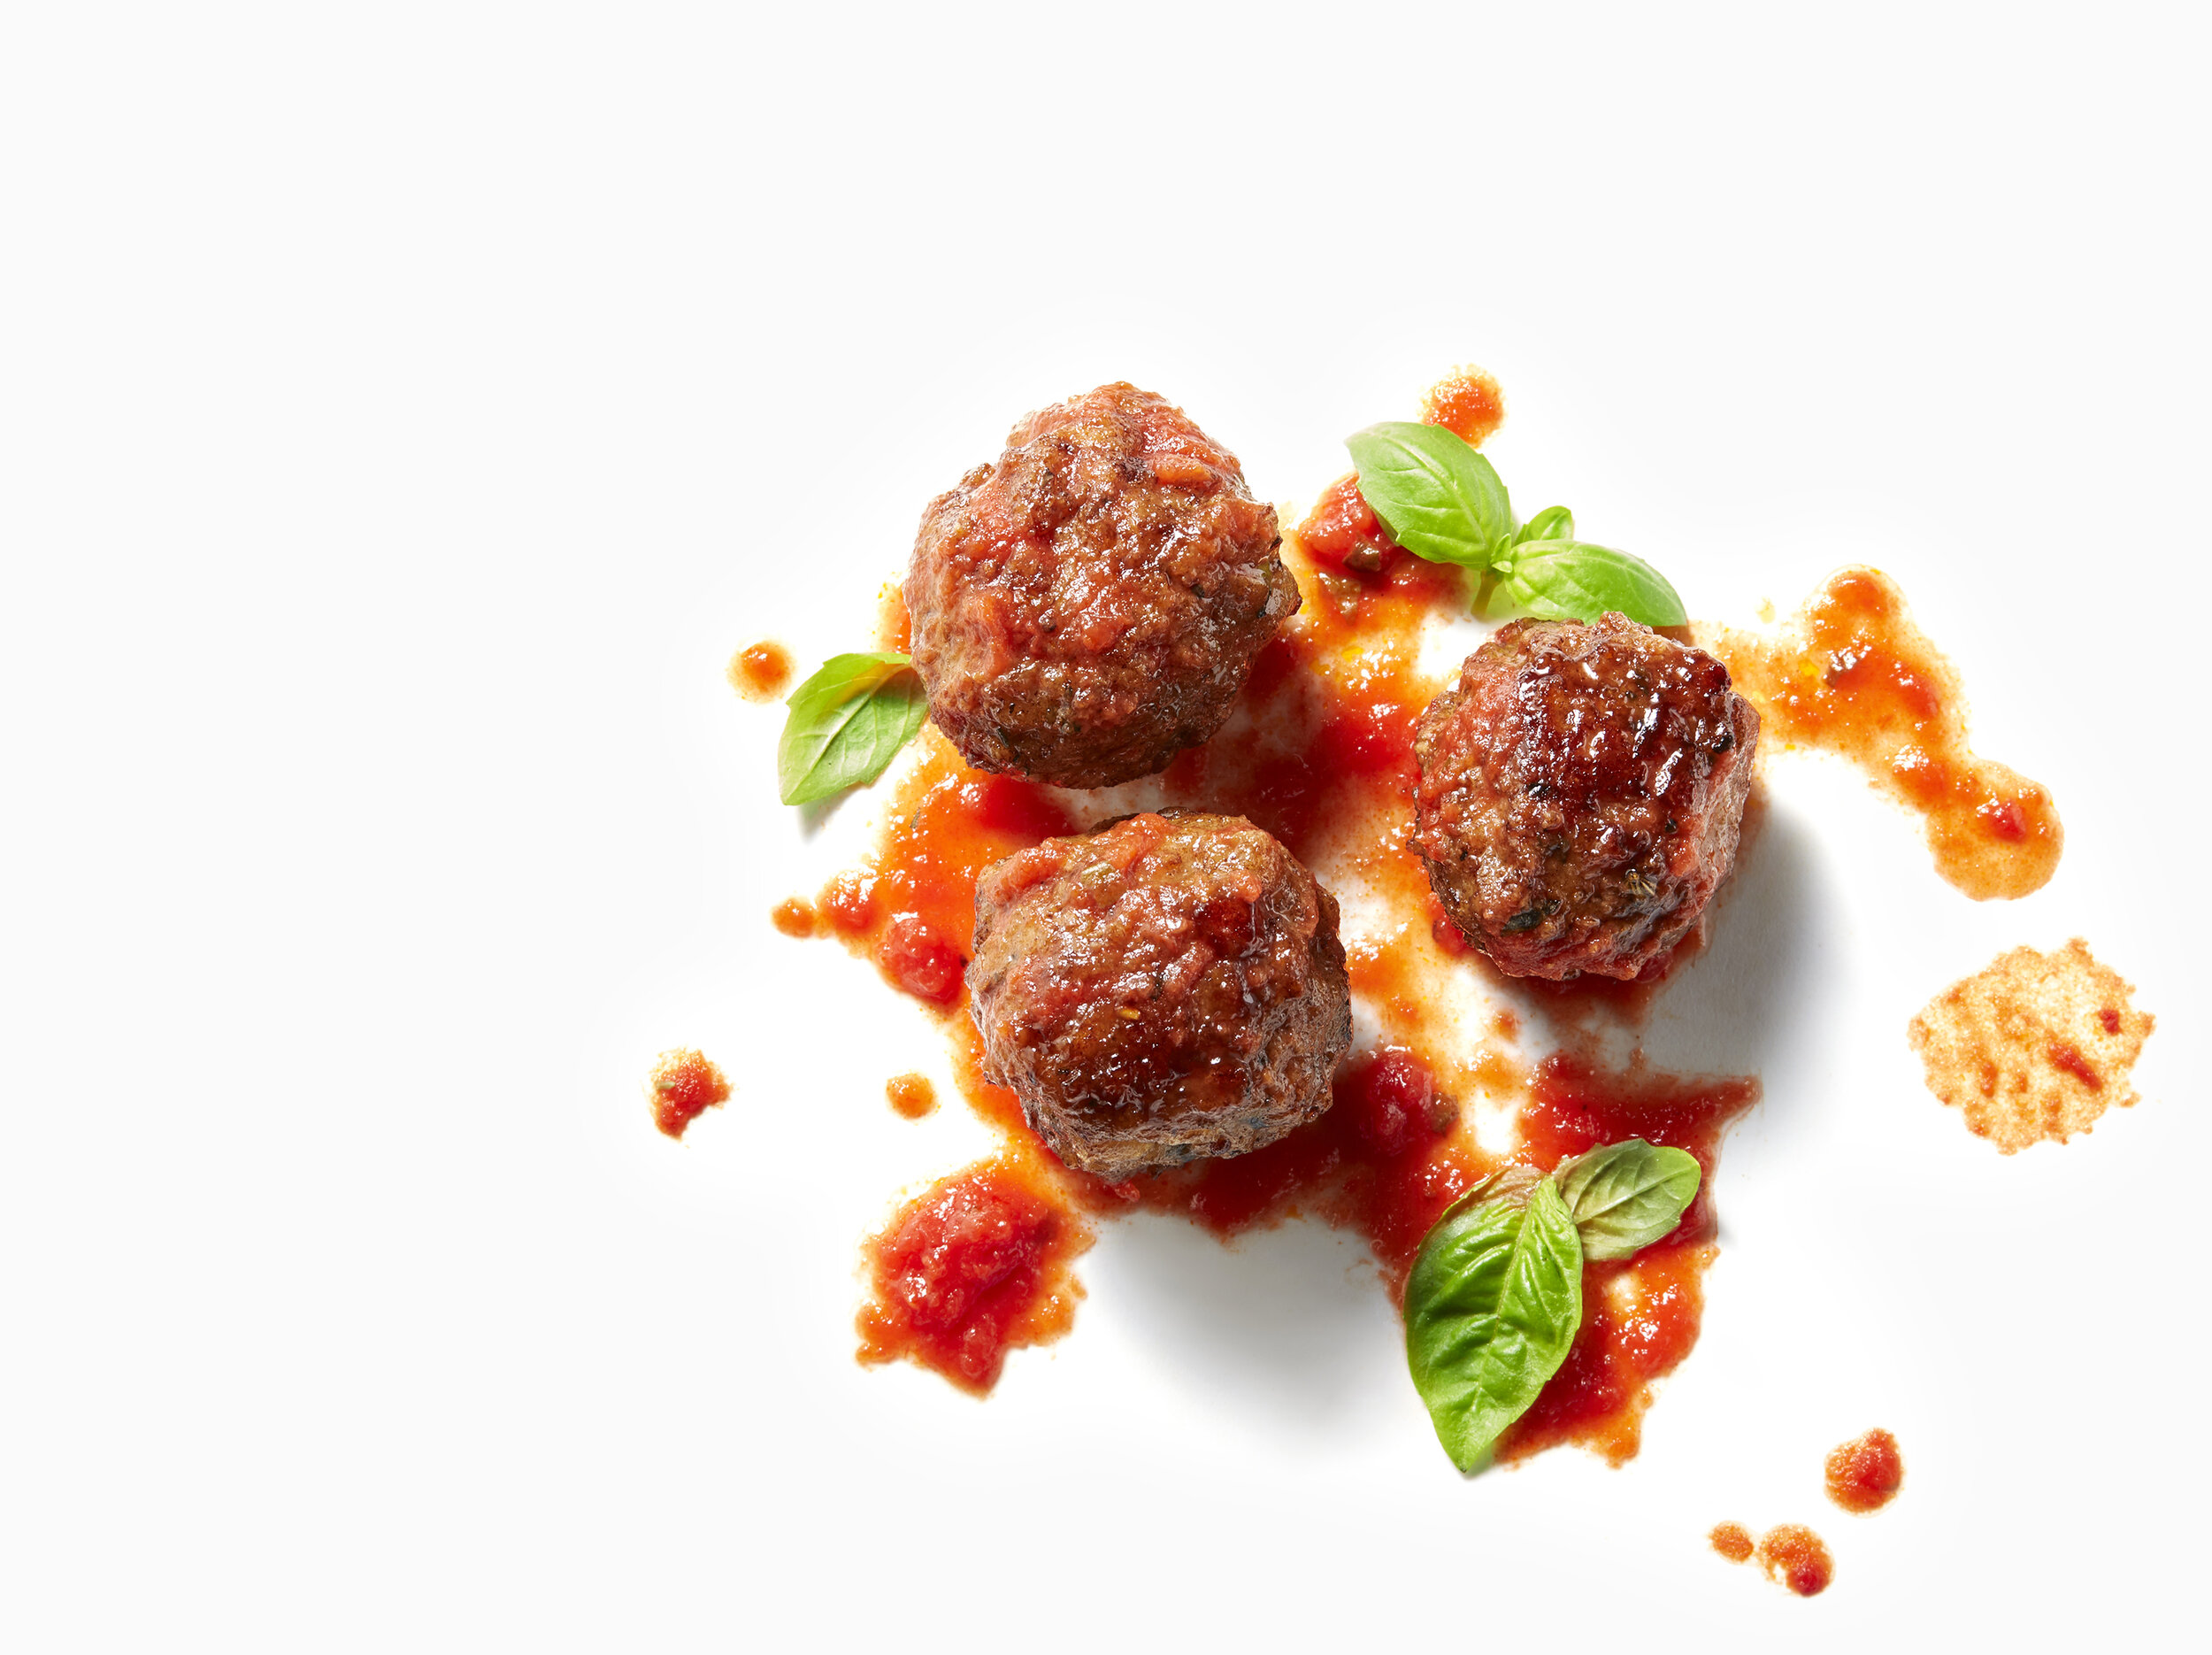 19_Exclusive_Brands_Packaging_Meatless_Meatballs_Whole_Tiny_Basil_Add_Sause copy.jpg